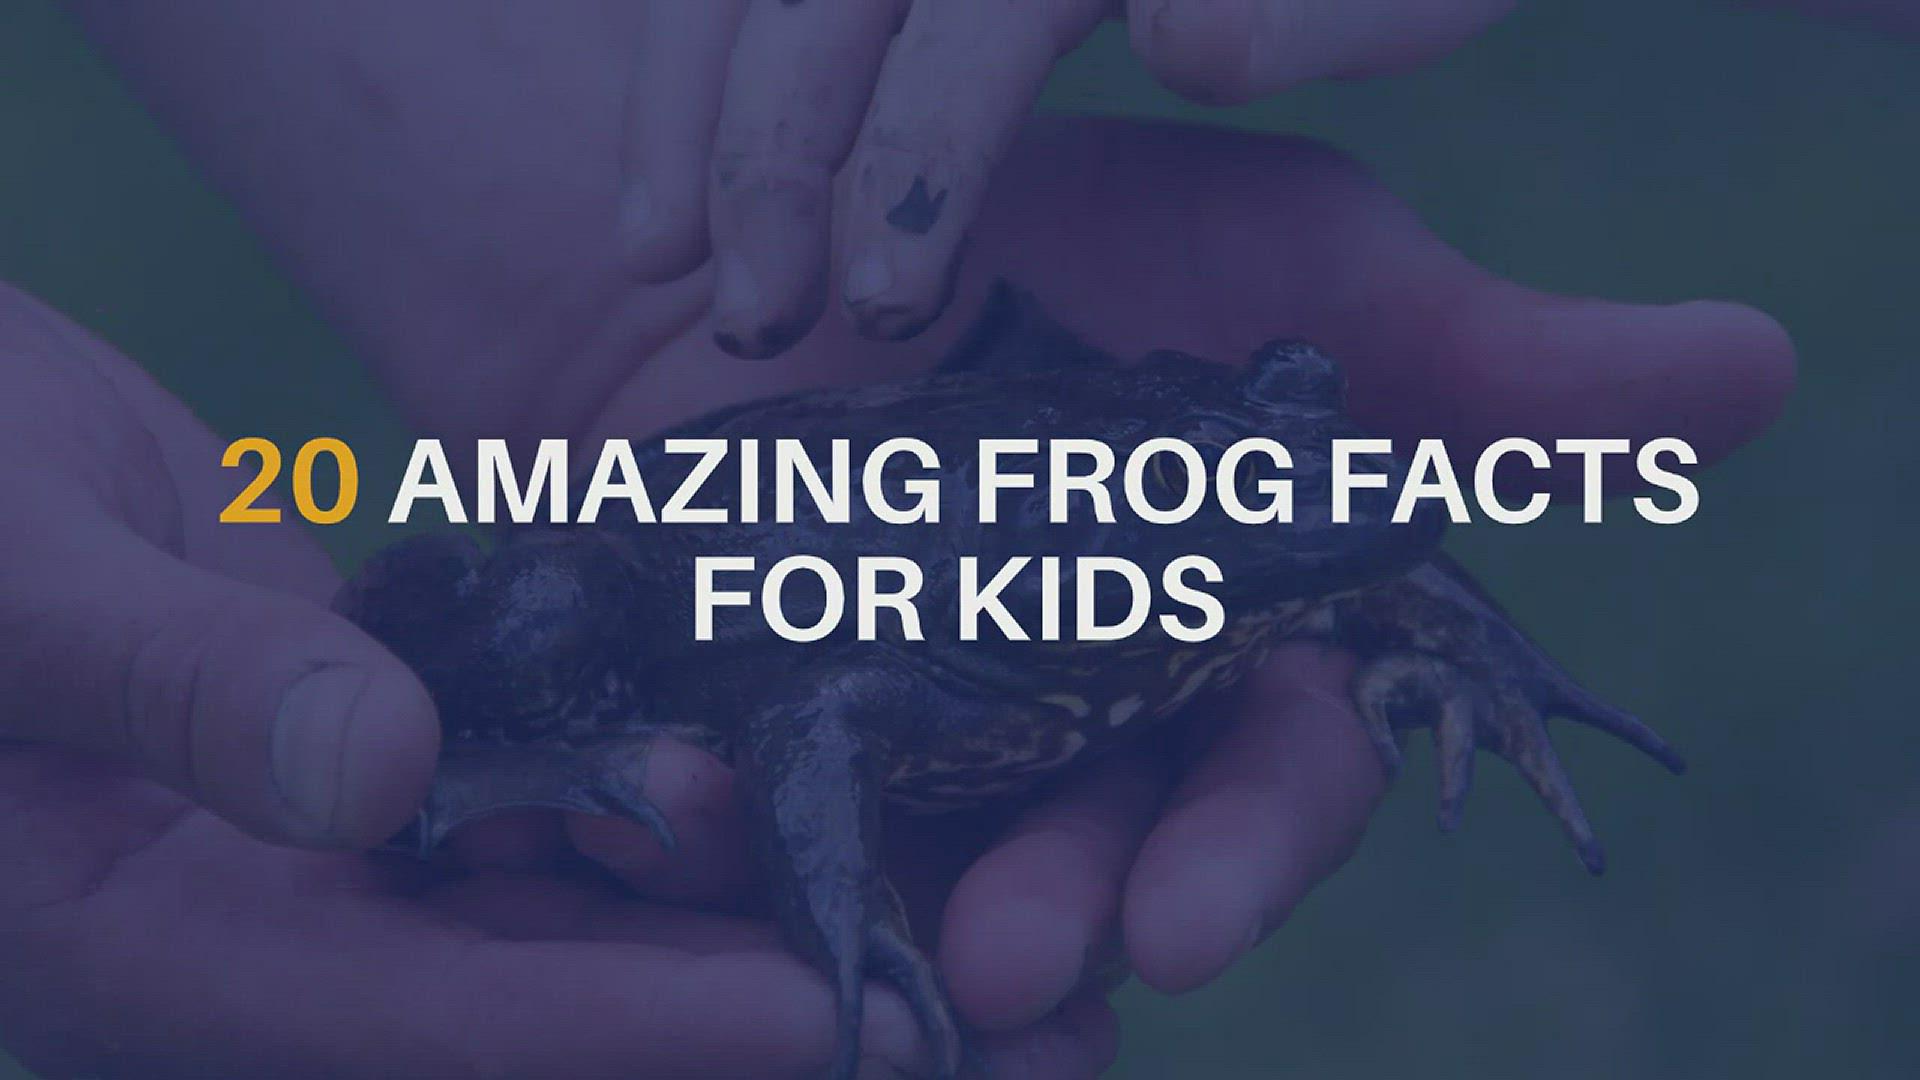 'Video thumbnail for Amazing Frog Facts for Kids'